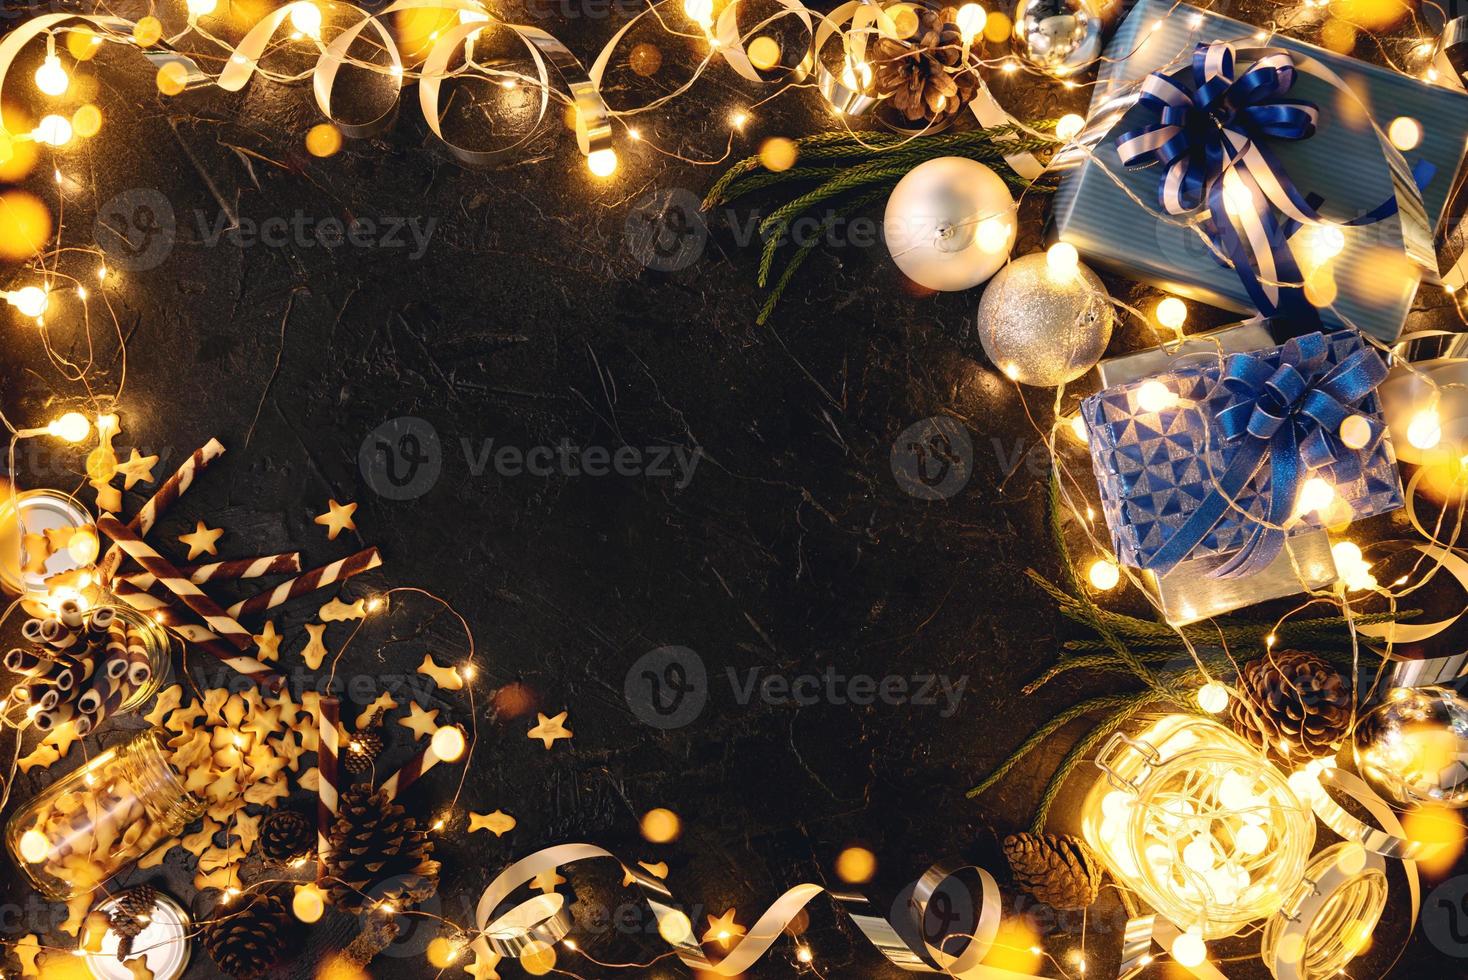 Christmas gift with blue ribbon and Christmas decoration balls on abstract bokeh black background with copy space. Holiday background greeting card for Merry Christmas and New Year. photo